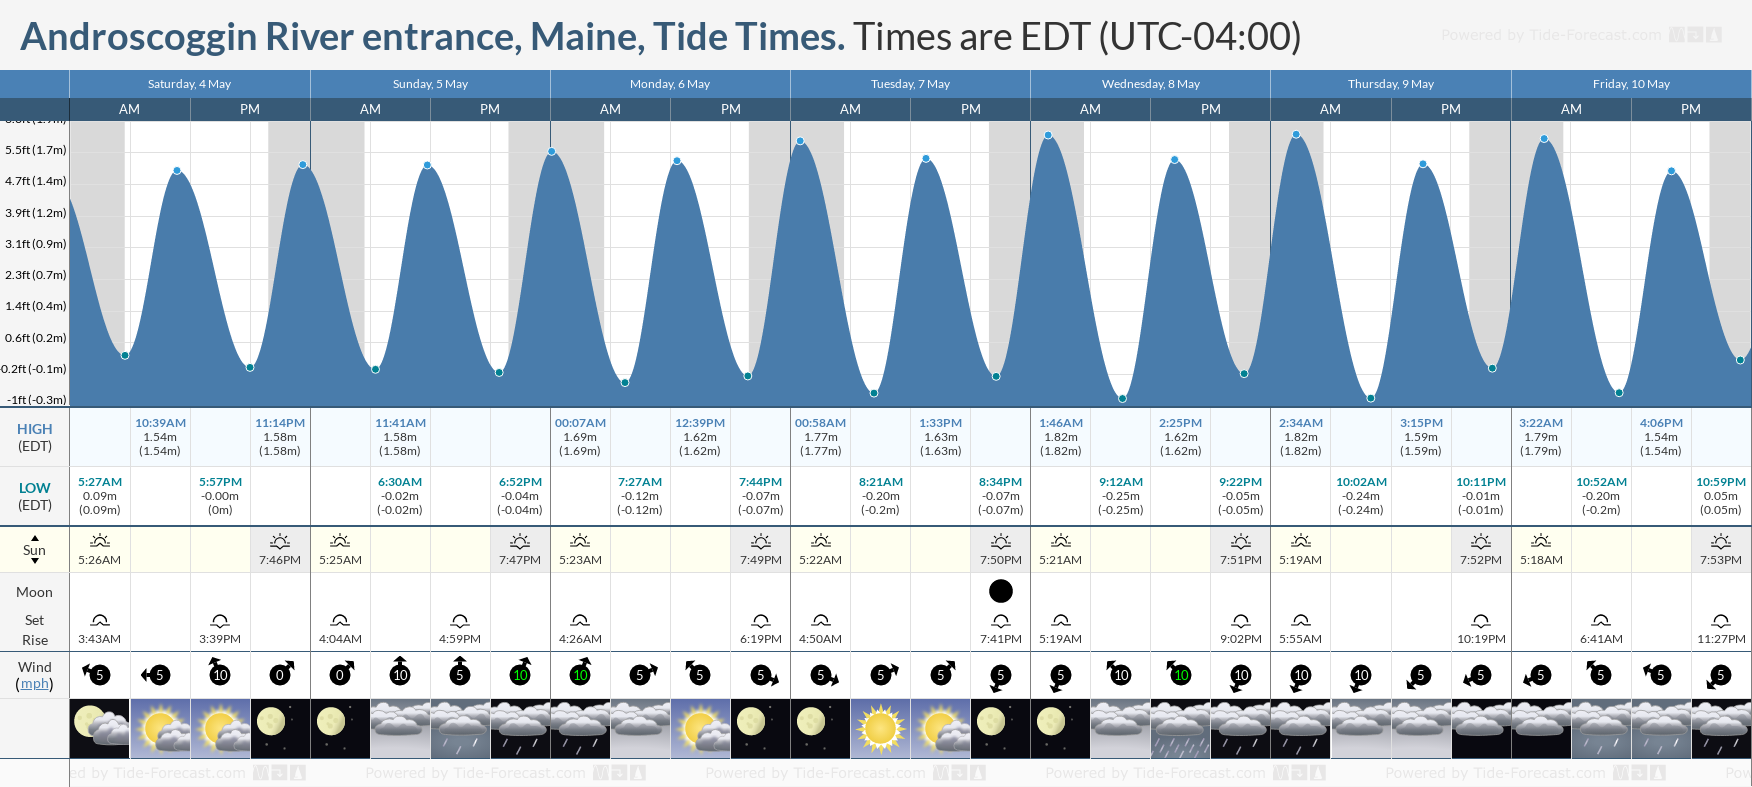 Androscoggin River entrance, Maine Tide Chart including high and low tide tide times for the next 7 days